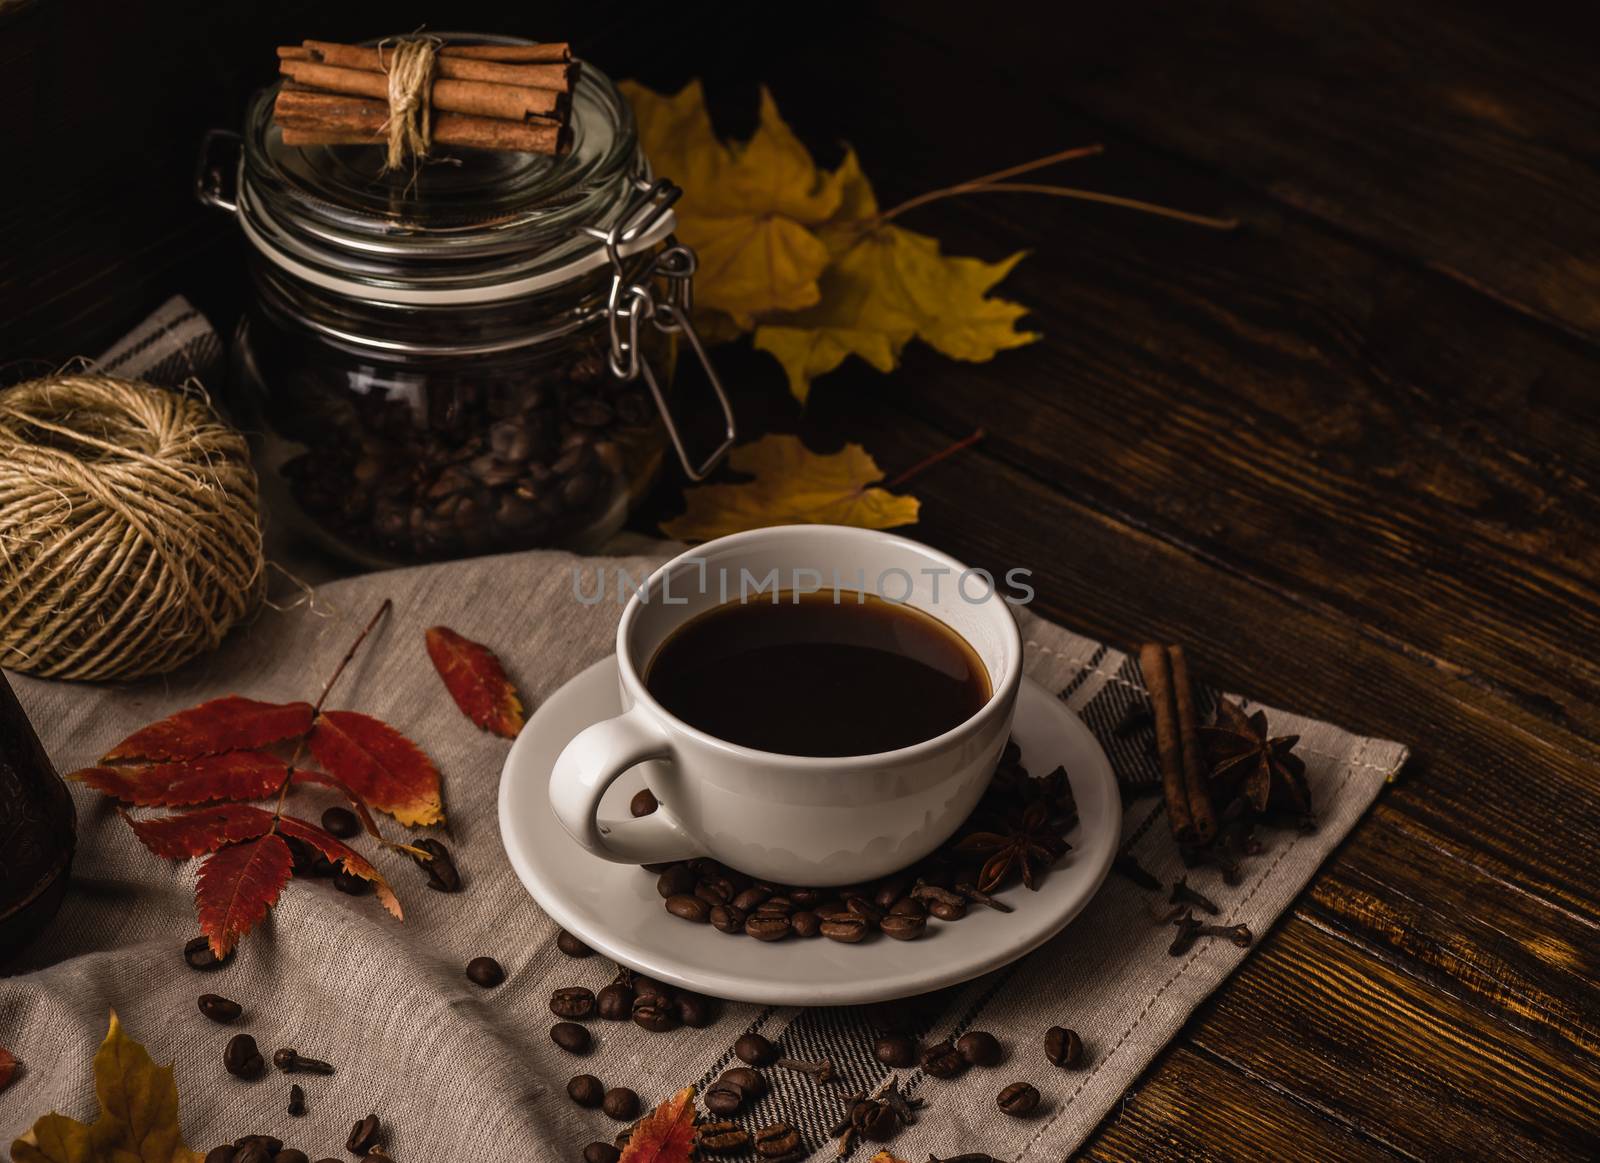 Autumn Evening with Cup of Coffee. Ingredients, Spices and Some Kitchenware. Space for text.